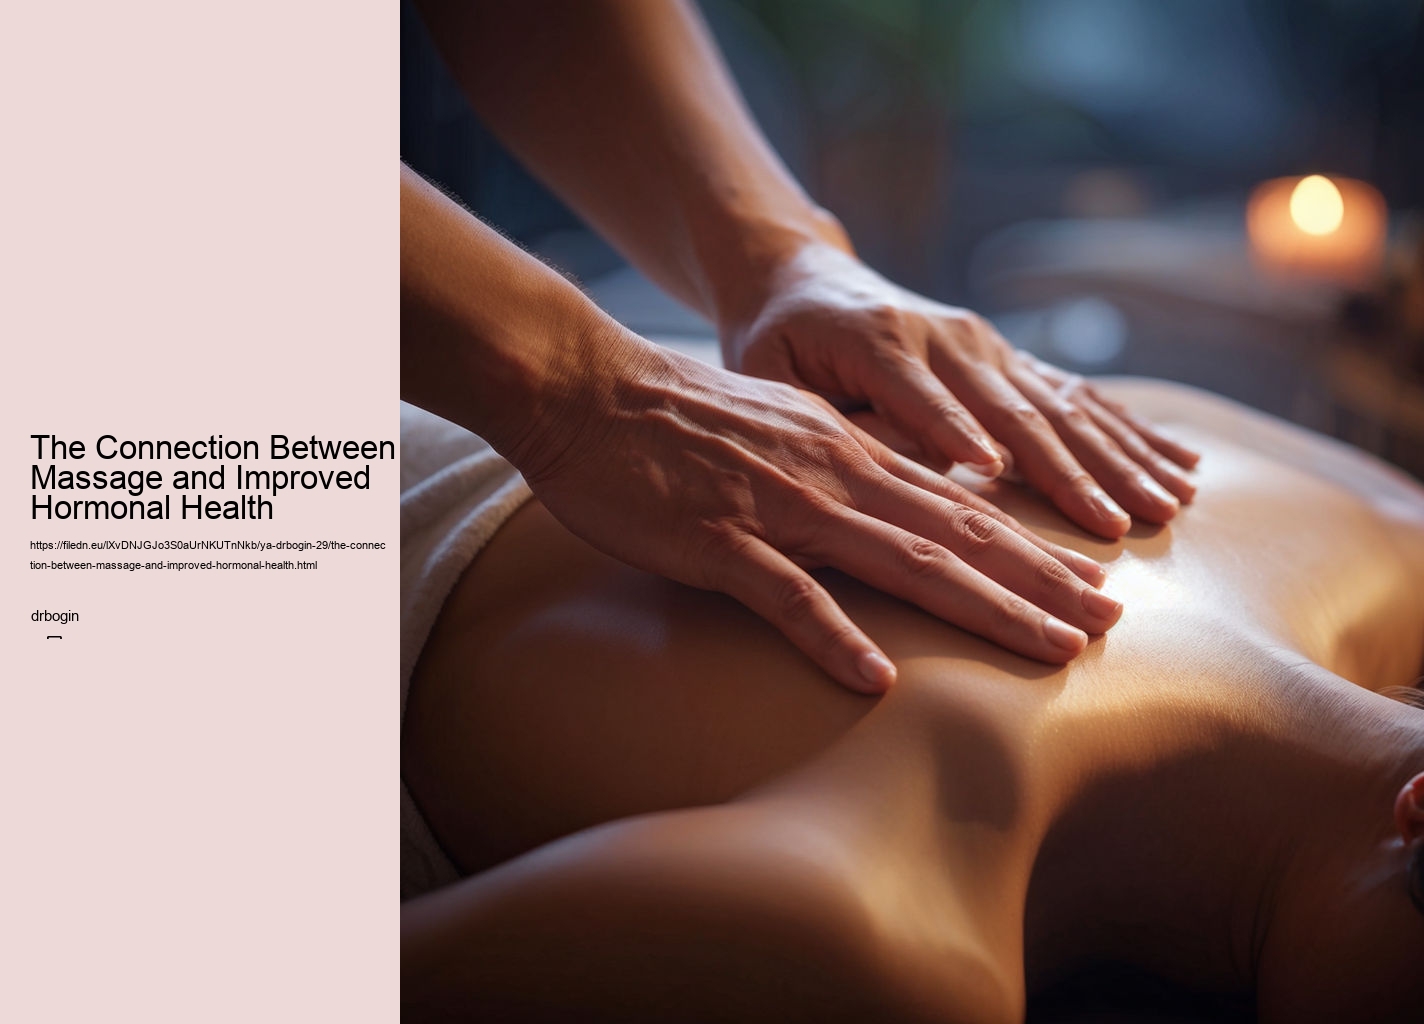 The Connection Between Massage and Improved Hormonal Health